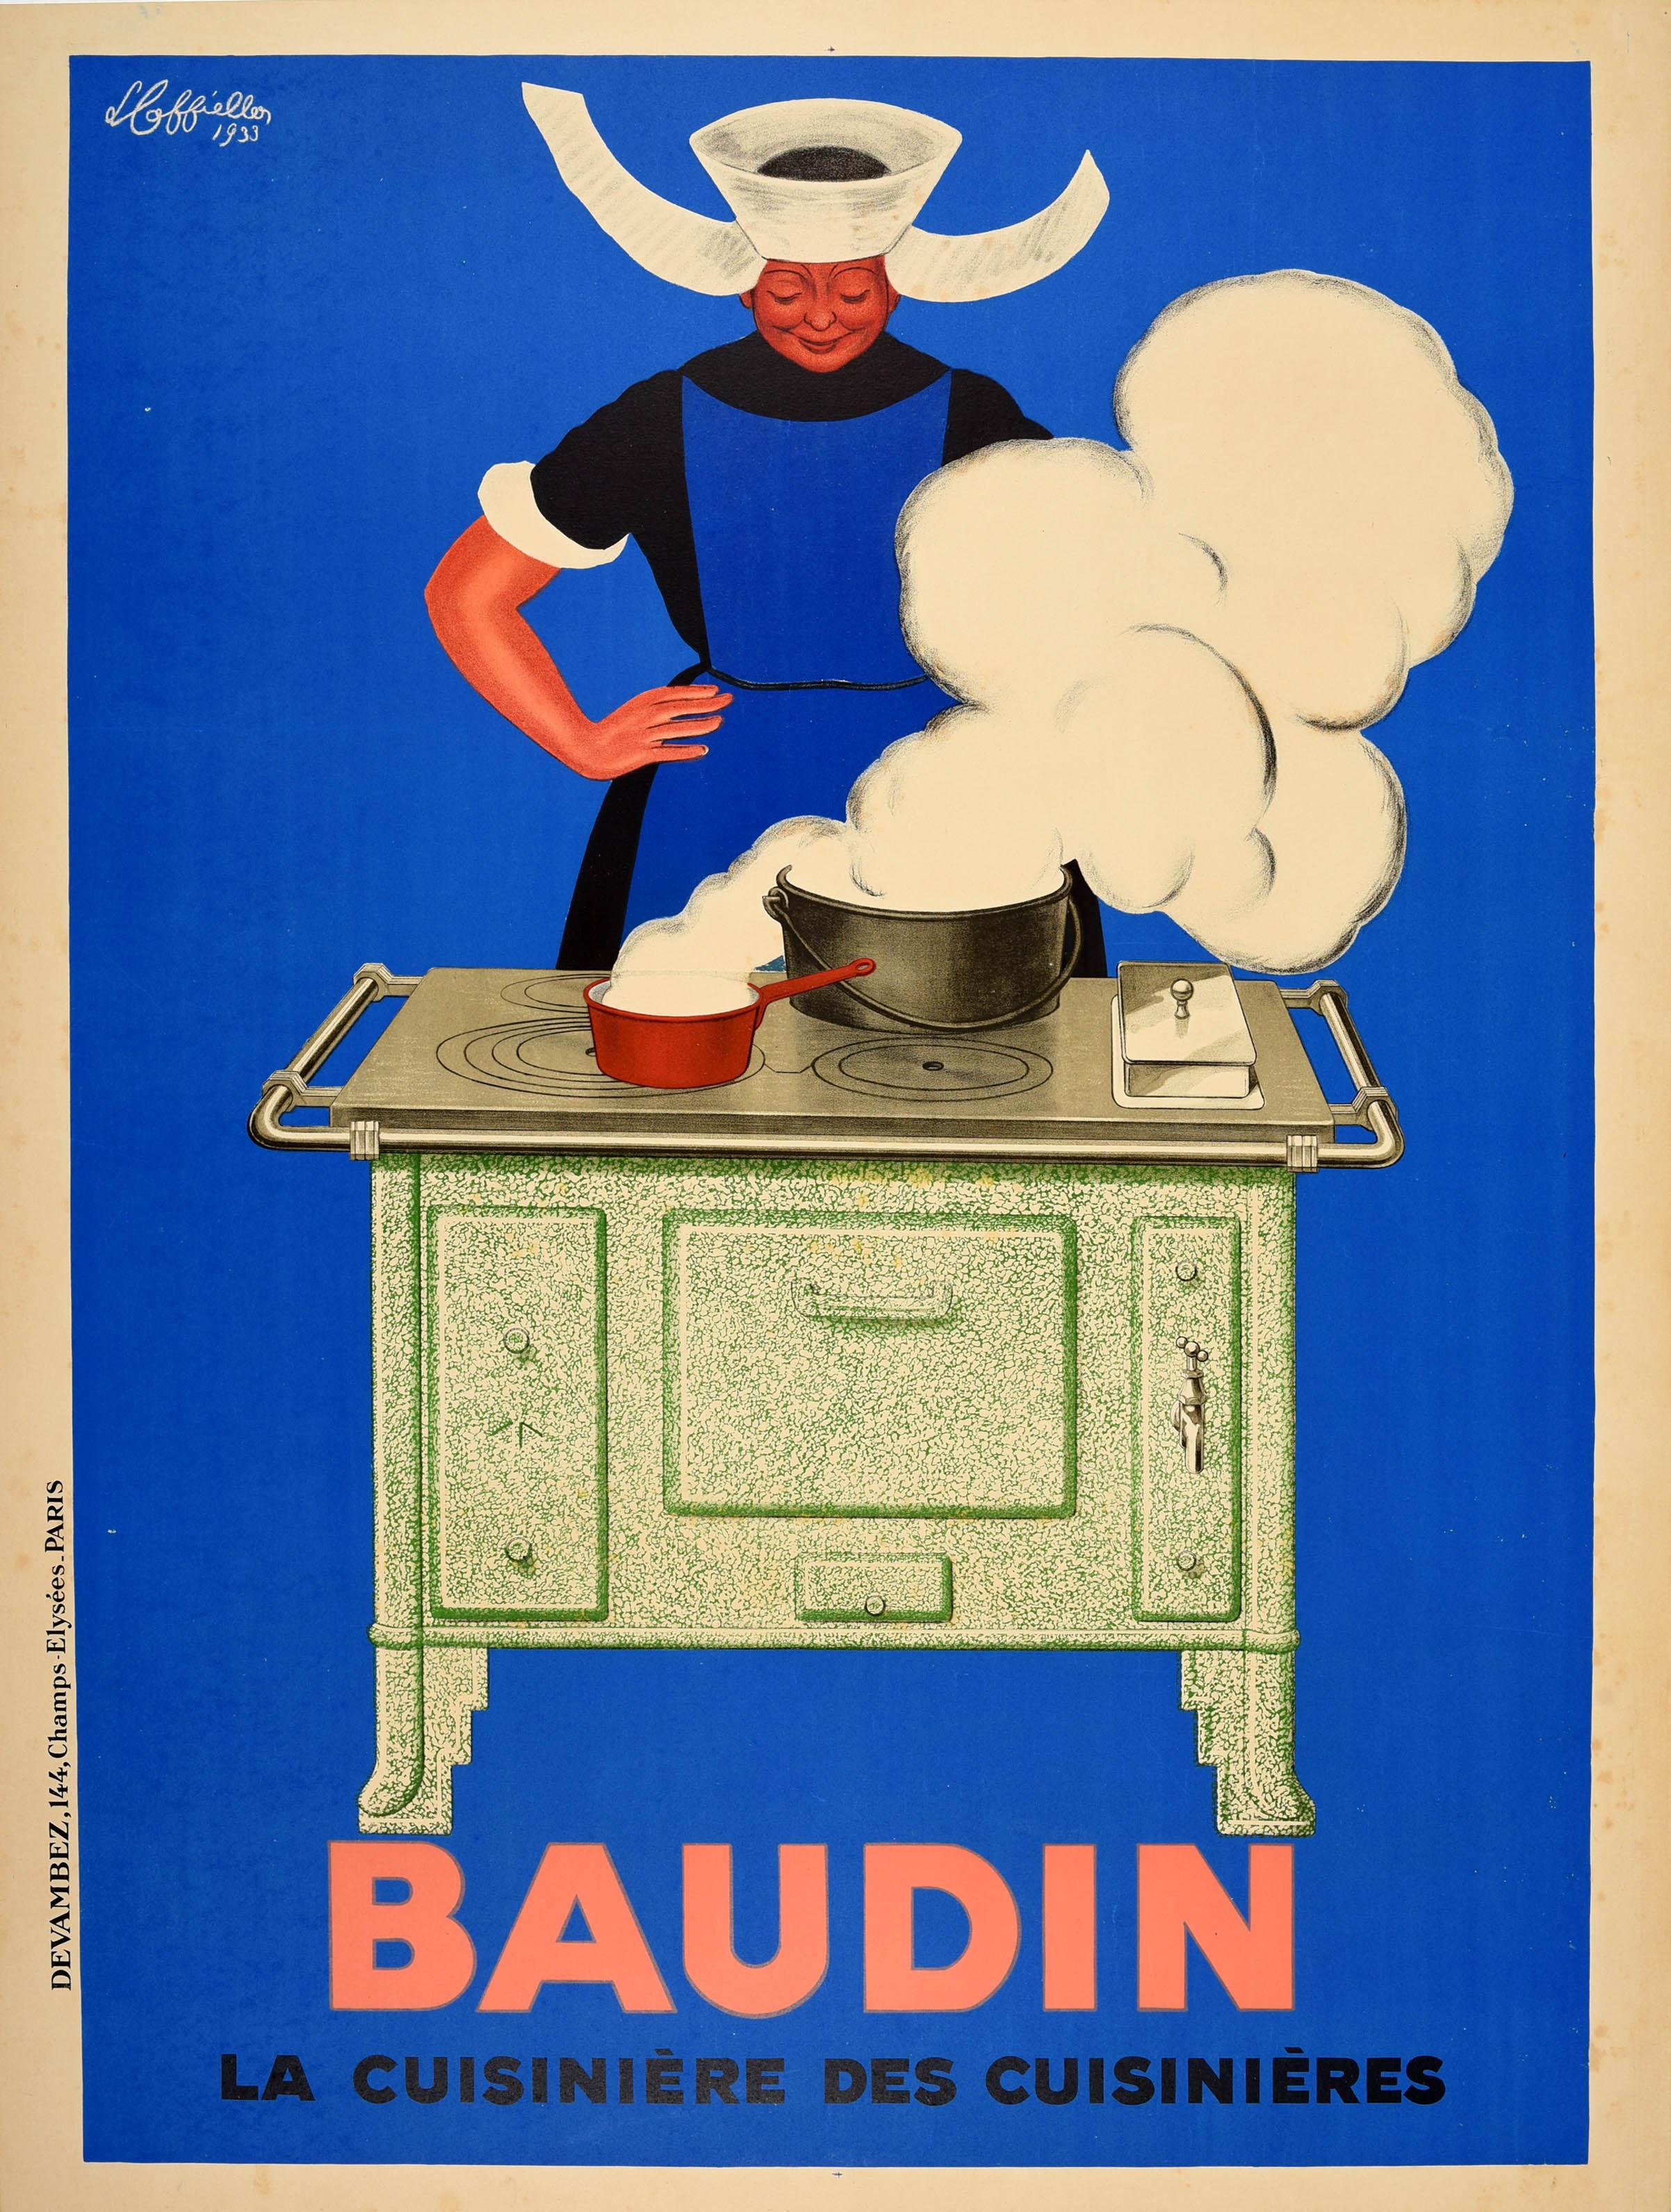 Original vintage advertising poster for kitchen equipment - Baudin La Cuisiniere des Cuisinieres / The Cooker of Cooks - featuring a great design by the renowned artist Leonetto Cappiello (1874-1942) showing a smiling lady in traditional clothing